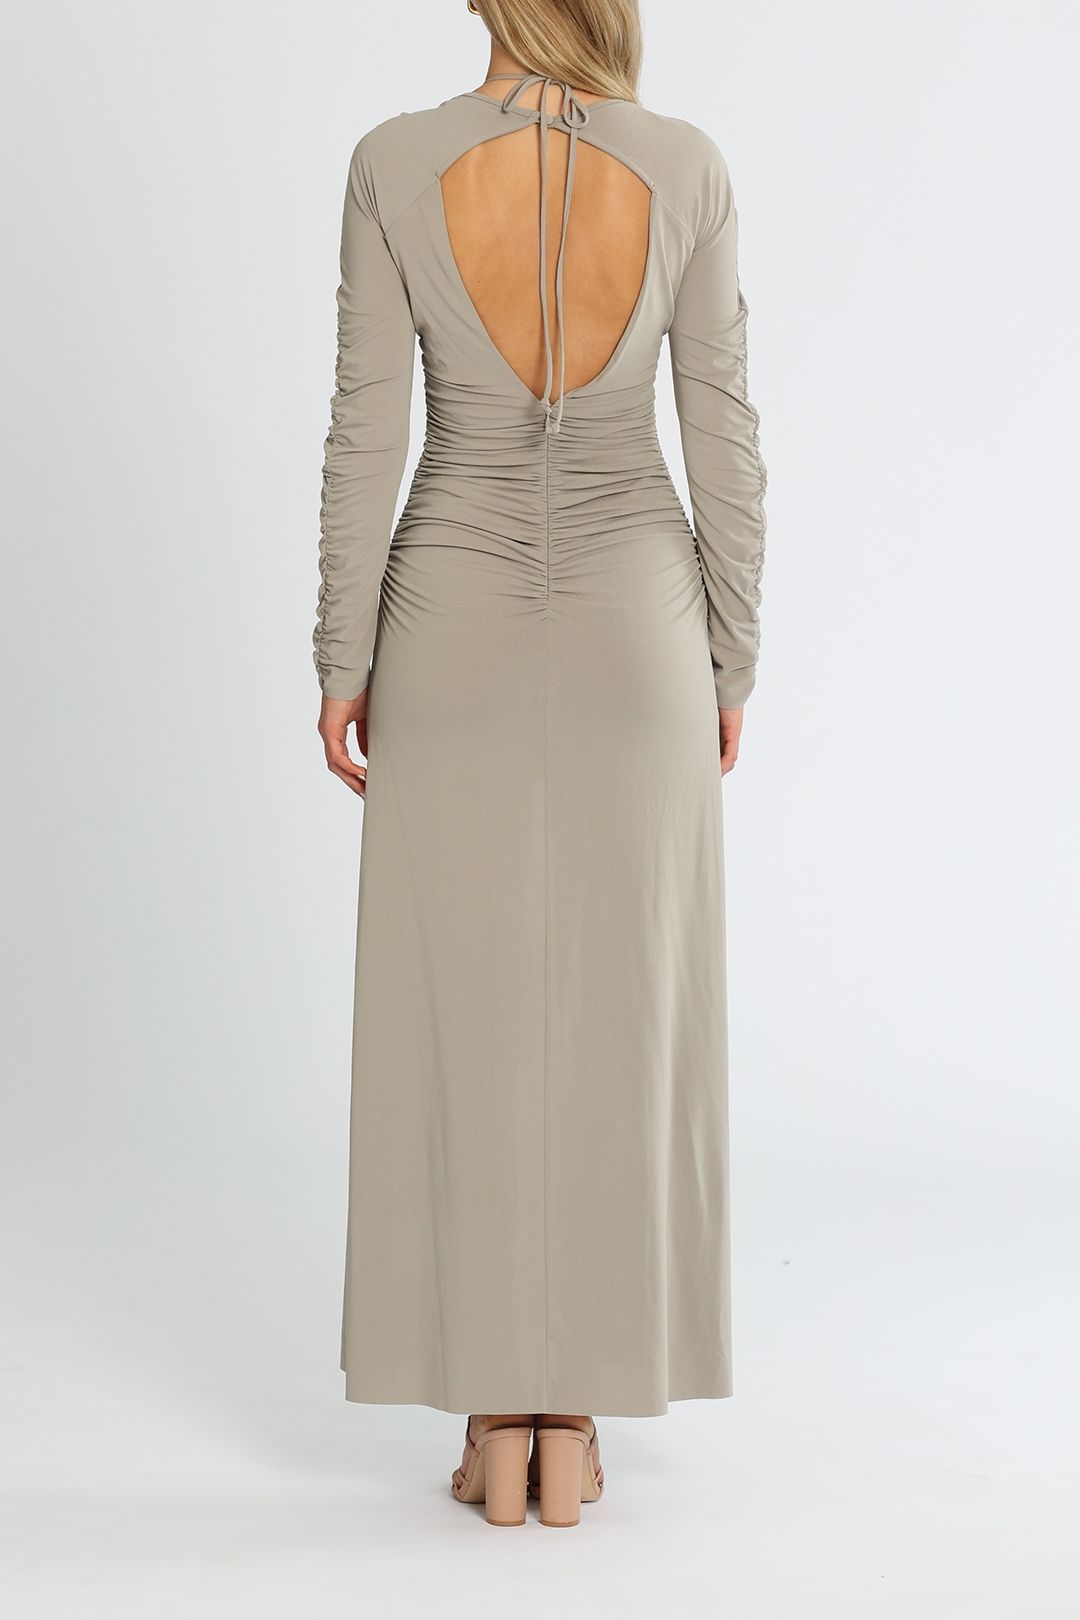 Bec and Bridge Adaline Long Sleeve Maxi Dress Taupe Backless